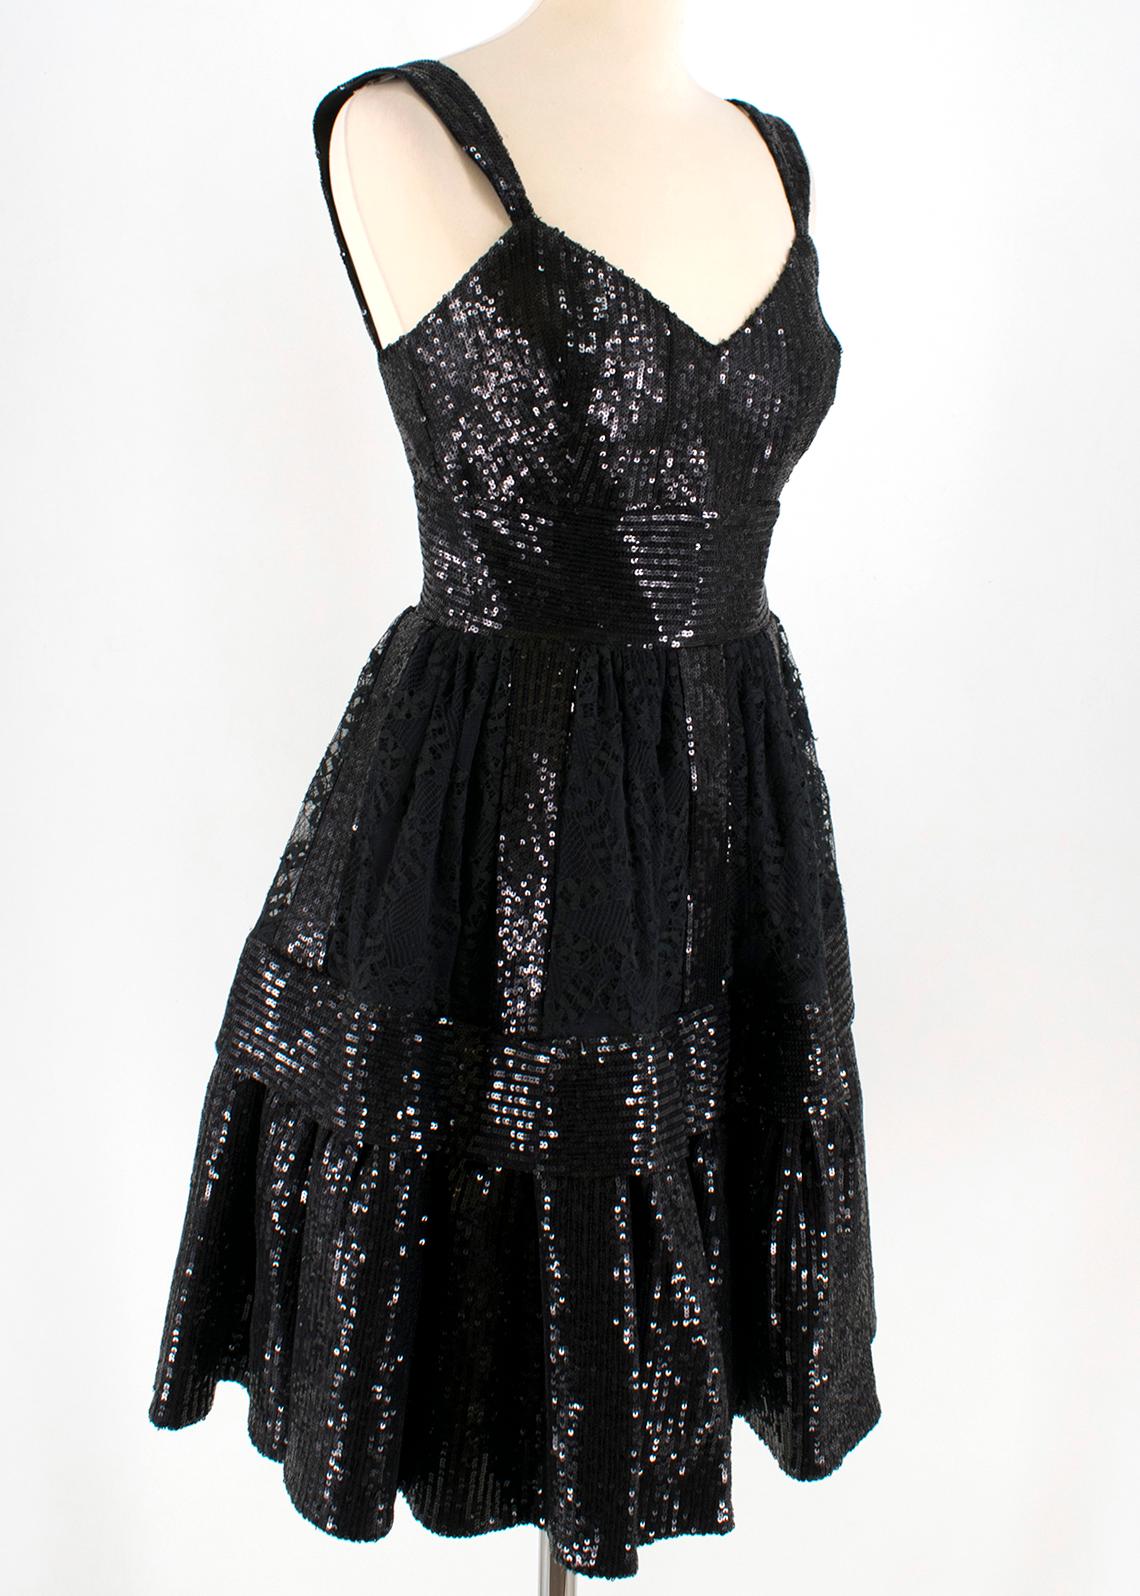 Ellie Saab Black Sequin & Lace Dress 

- black sequin dress
- lace embellishment to the skirt
- sleeveless
- v neckline 
- lined
- double zip fastening to the back 

This seller usually wear size XS. 

Please note, these items are pre-owned and may